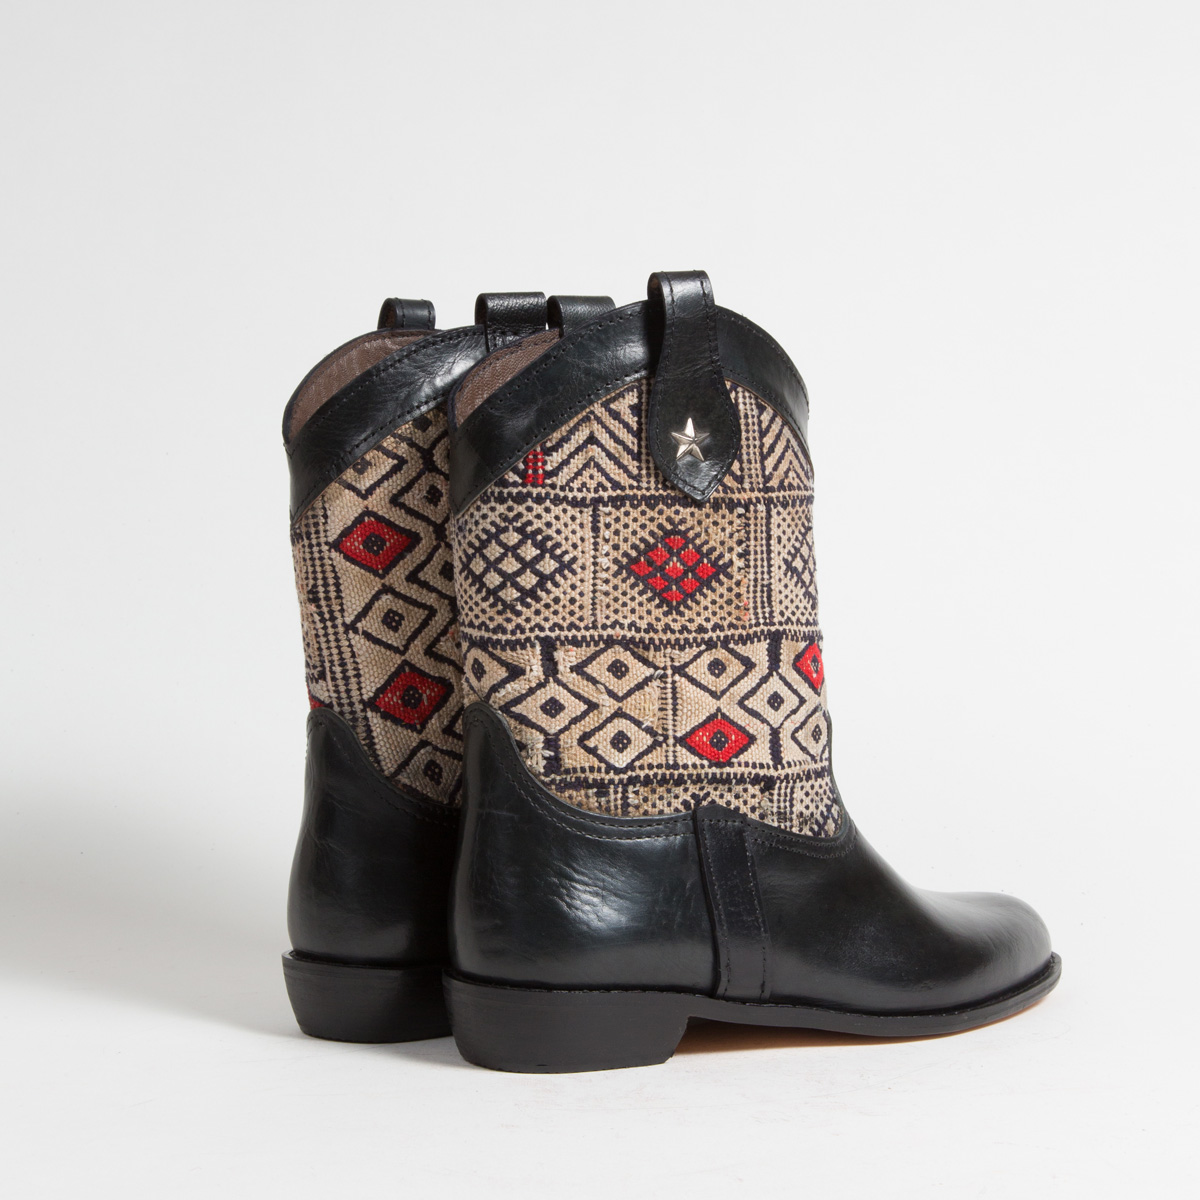 Bottines Kilim cuir mababouche artisanales (Réf. MN16-42)